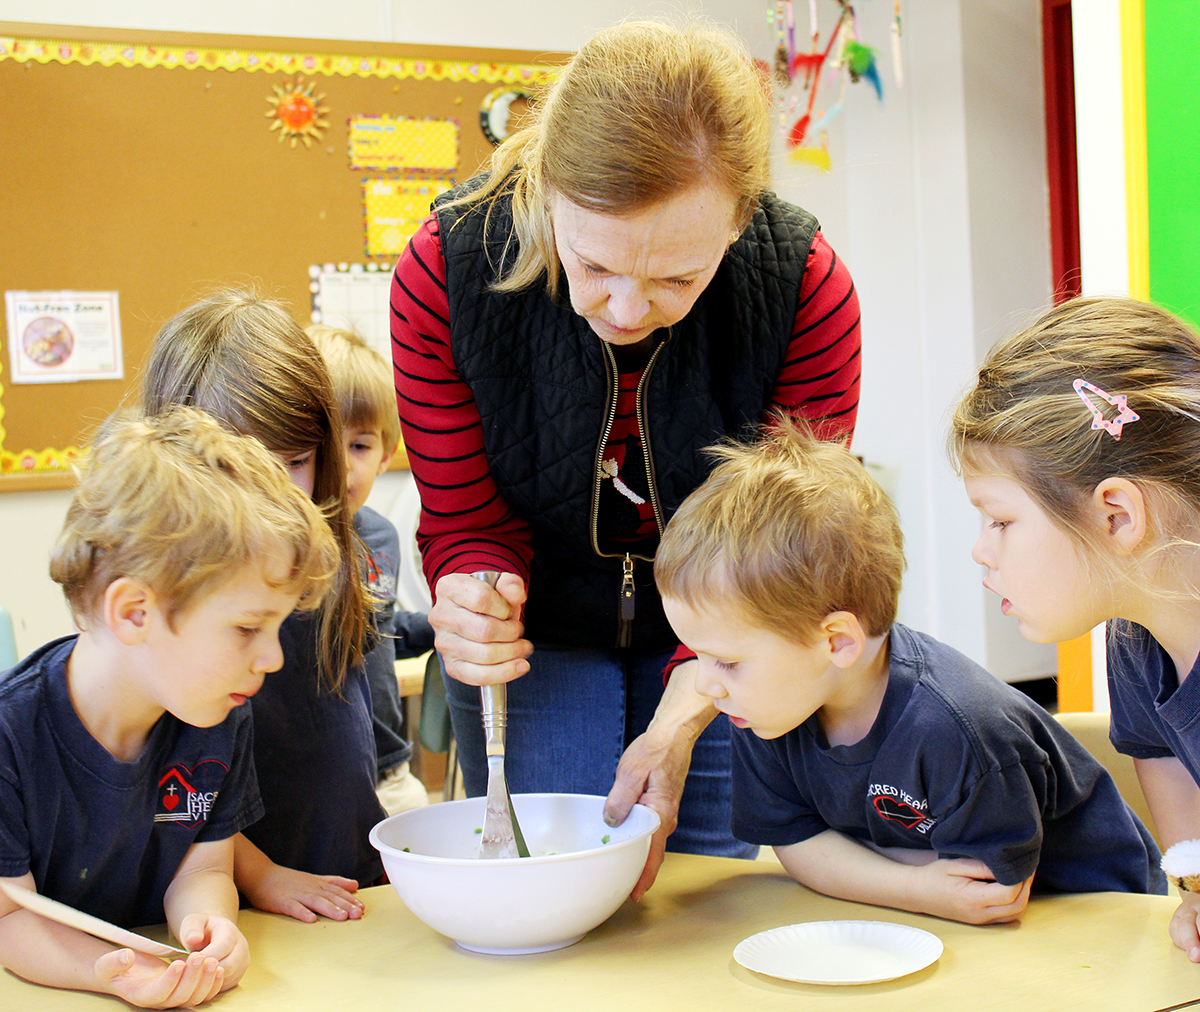 Students at Sacred Heart Villa Preschool on The Hill in St. Louis learn how to make 'smashy peas' from chef and Master Gardener Margaret Grant. Photo by Linda Geist.